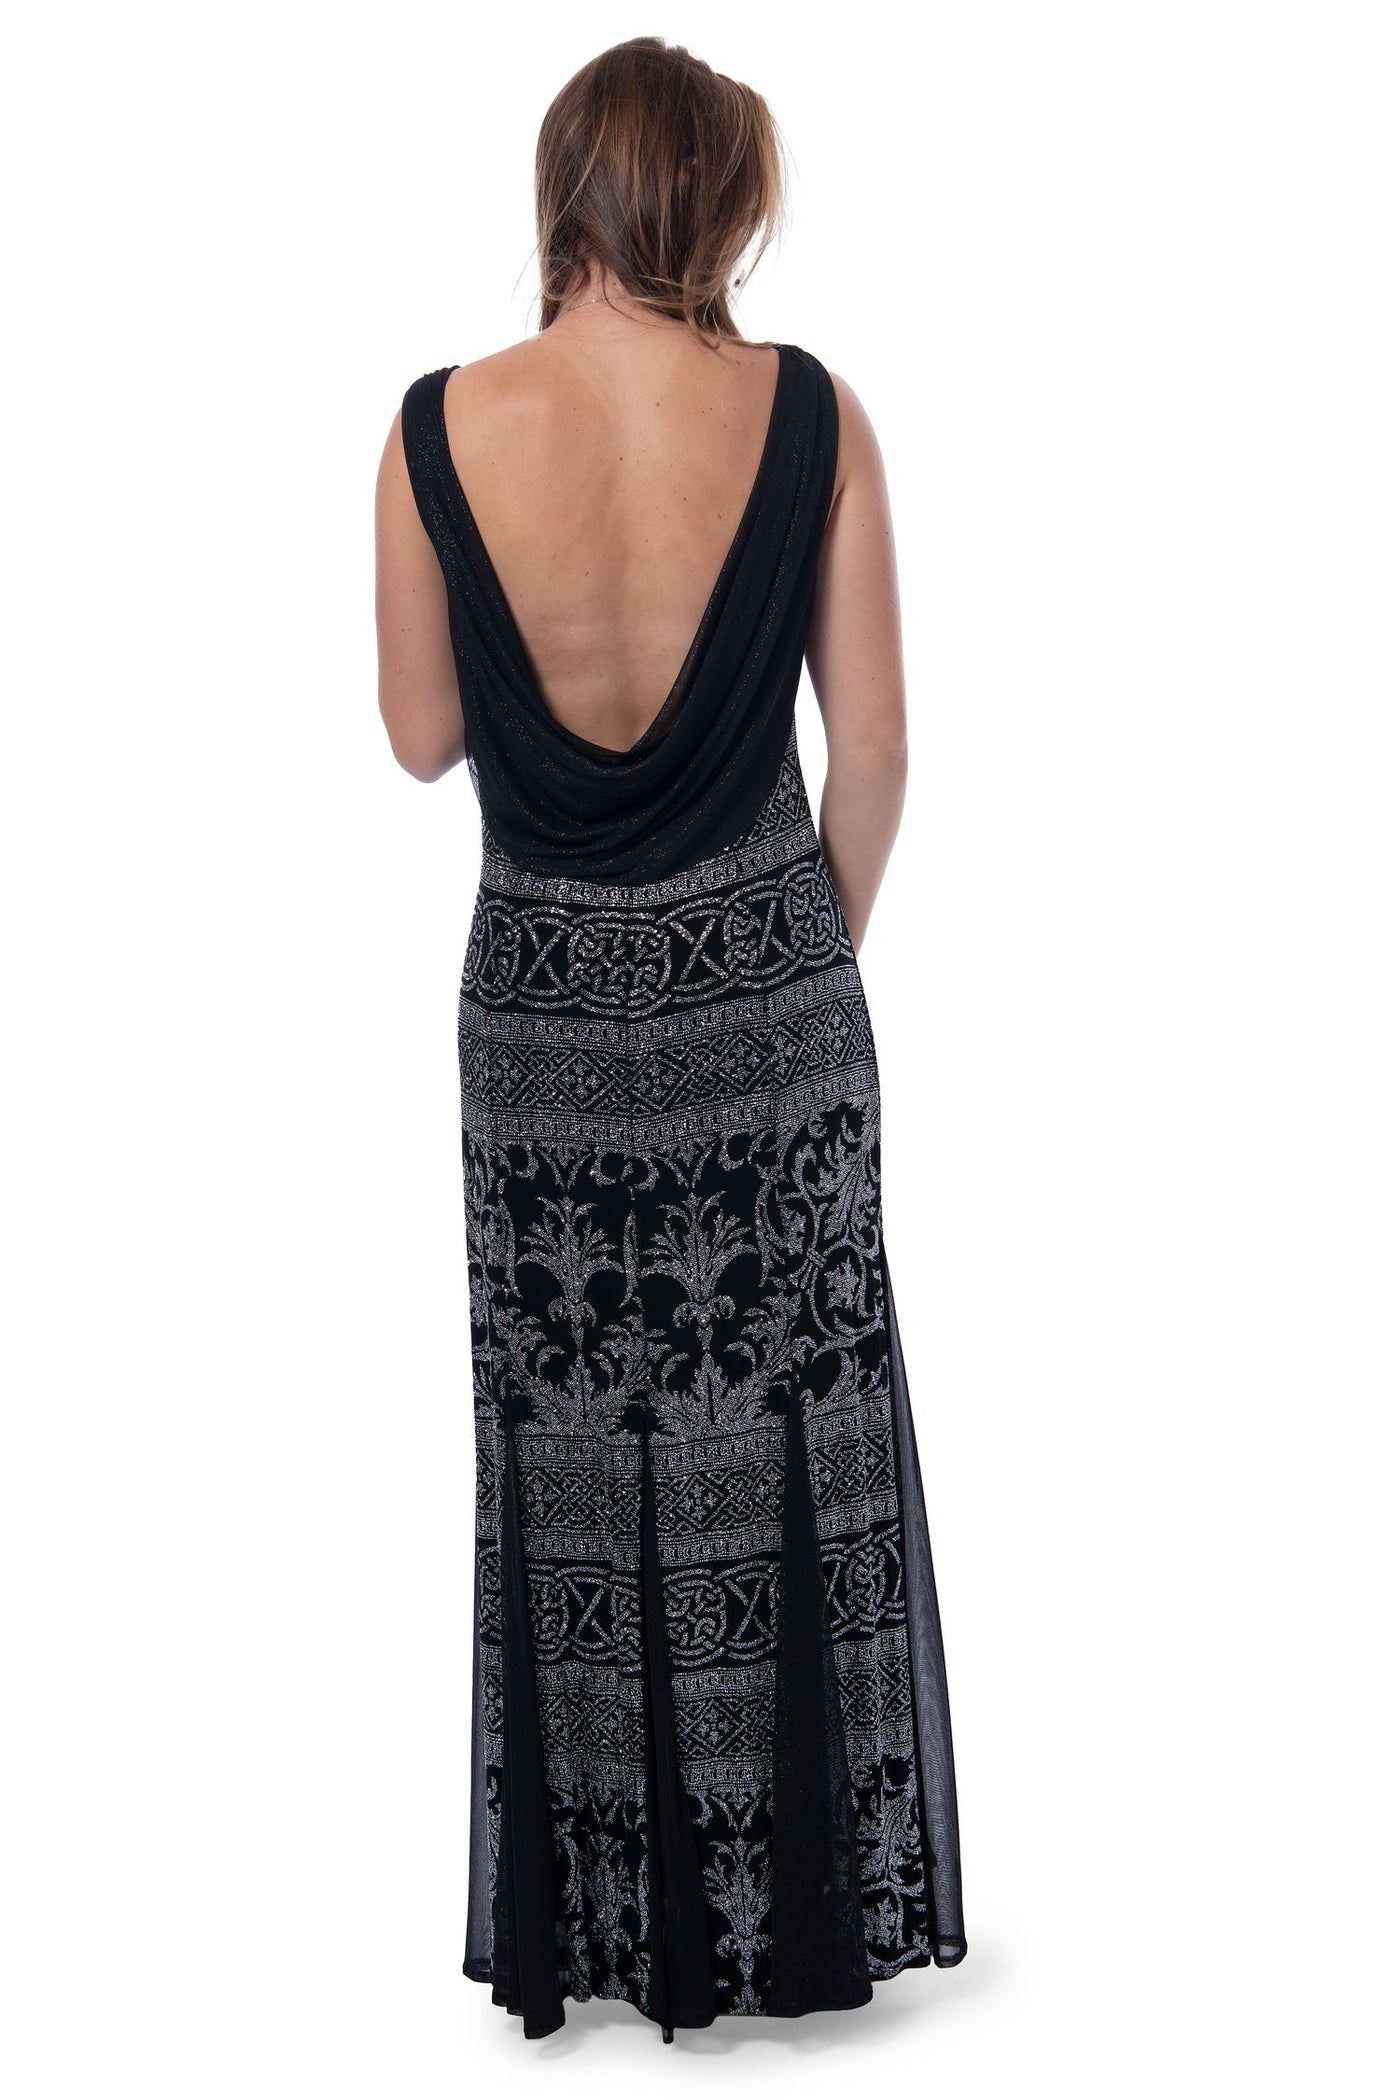 Tadashi long black evening gown with silver detailing